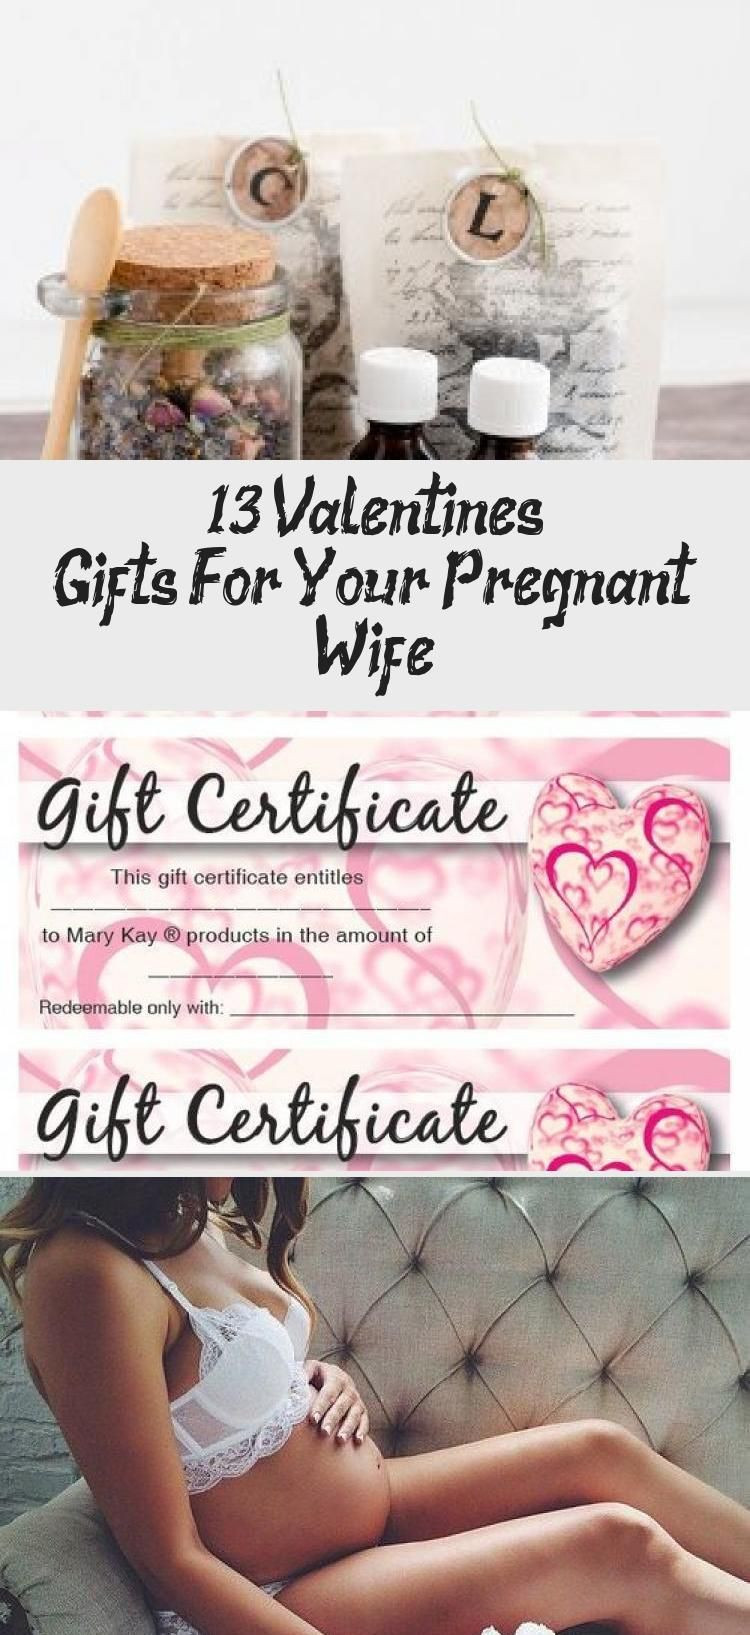 Valentine Day Gift Ideas For Pregnant Wife
 13 Valentine’s Gifts For Your Pregnant Wife in 2020